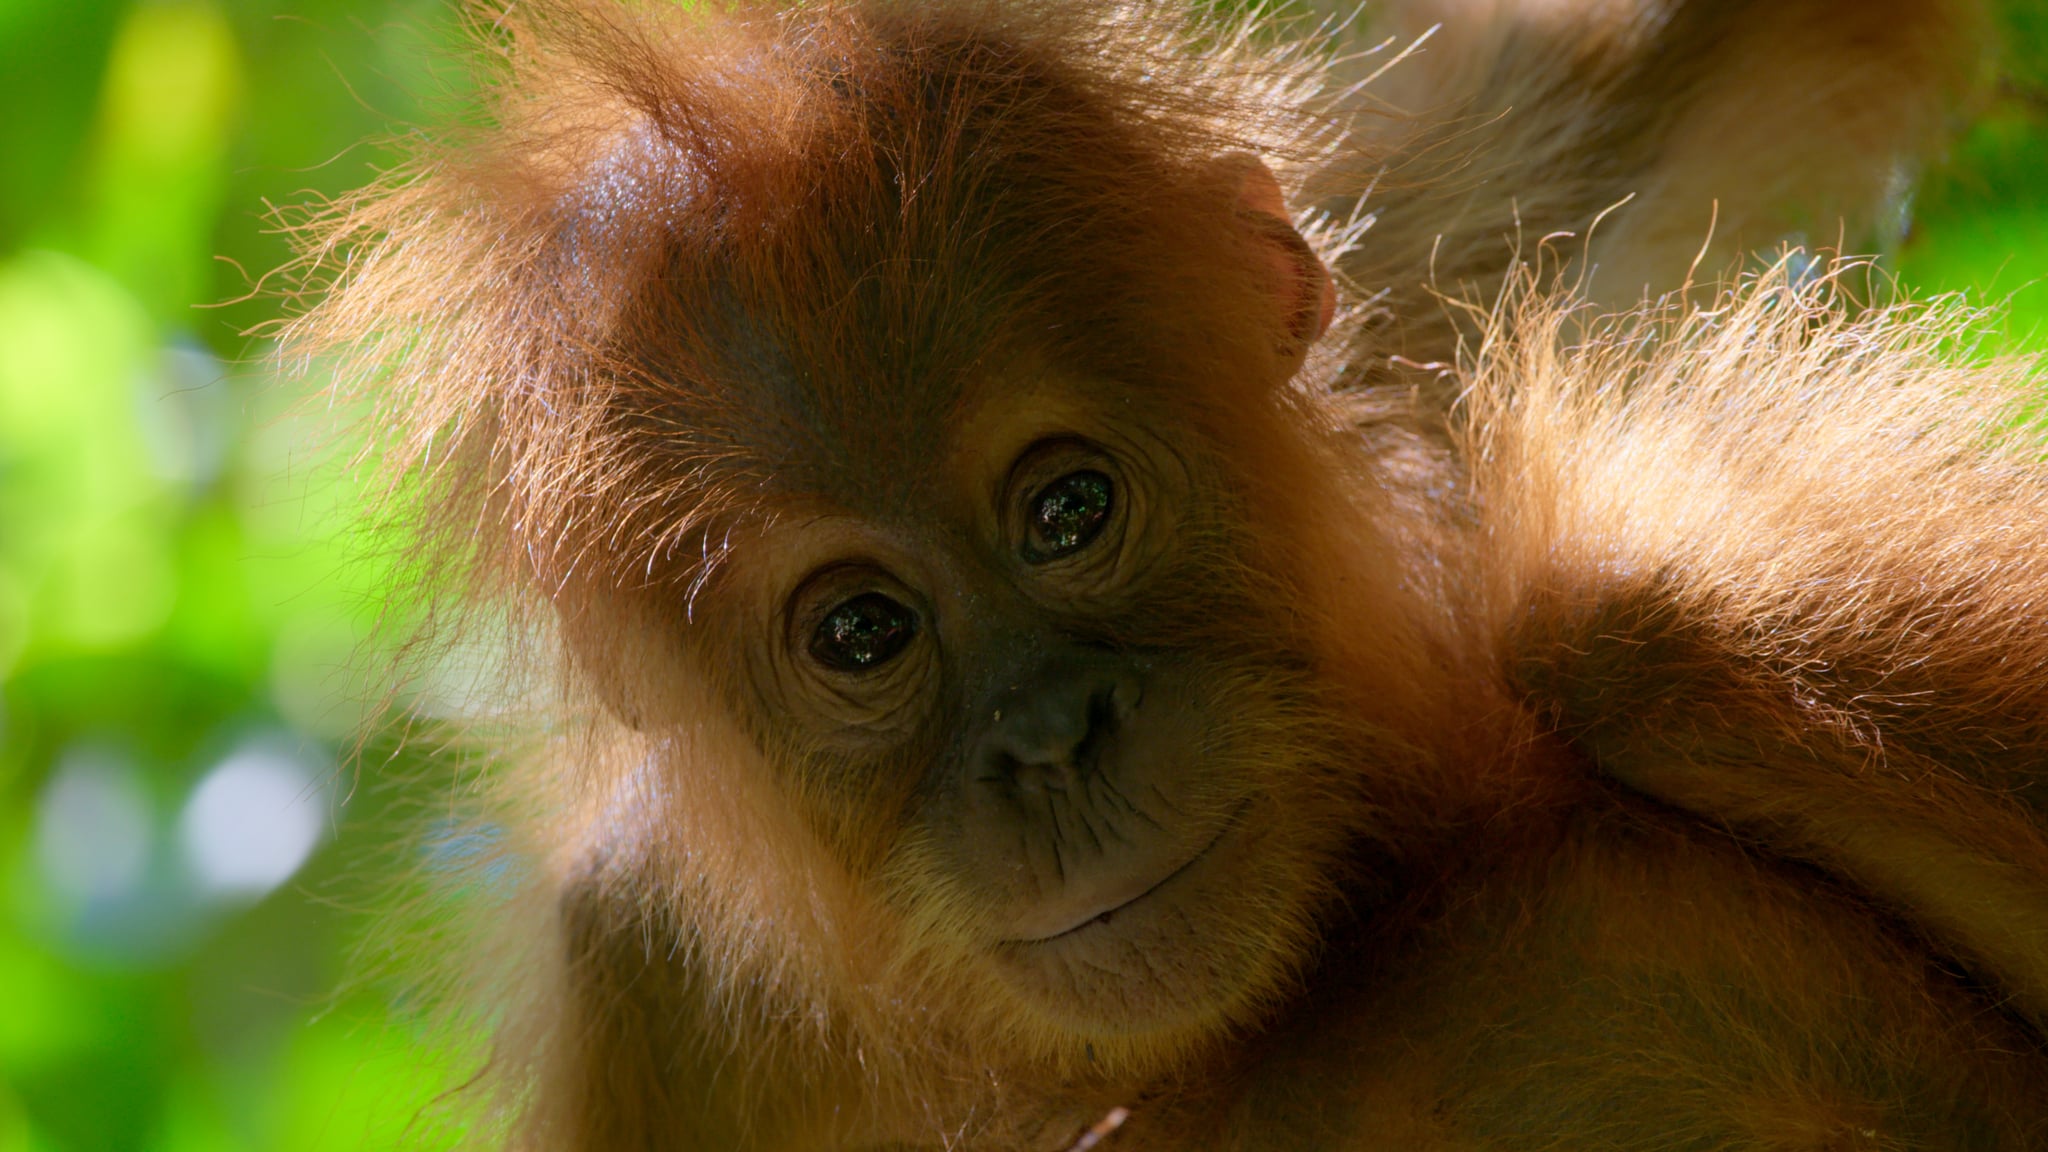 The production of palm oil continues to be a major driver of deforestation of some of the world's mostbiodiverse forests, destroying the habitats of critically endangered species like the orangutan. Image takenfrom David Attenborough: A Life on Our Planet. The film will be in cinemas on 16 April, before being releasedglobally on Netflix in spring 2020.Credit: Netflix / David Attenborough: A Life On Our Planet